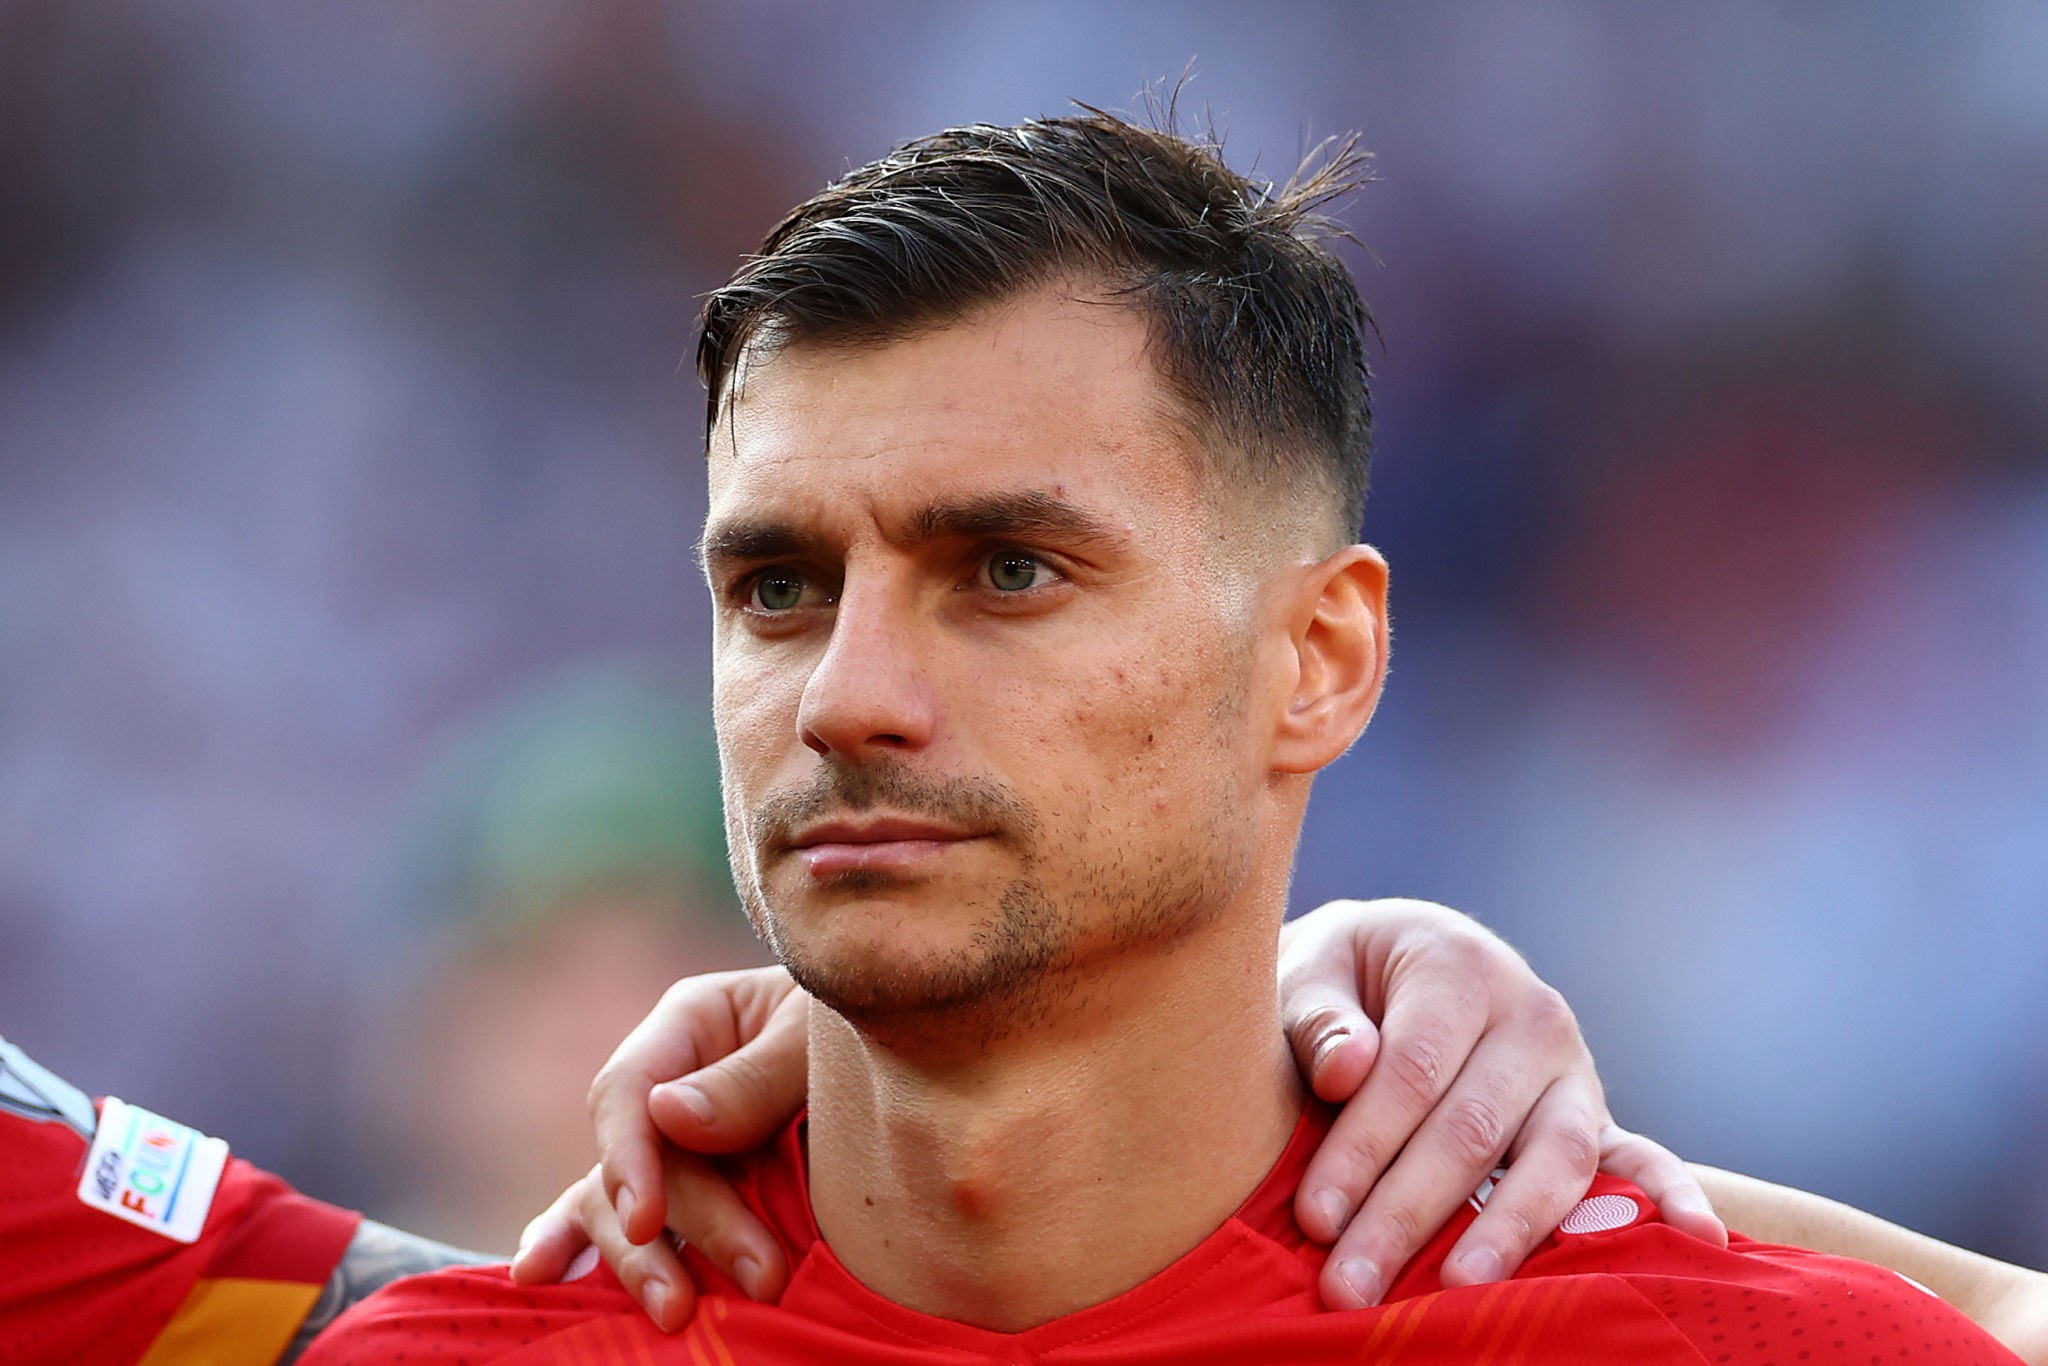 MANCHESTER, ENGLAND - JUNE 19: Stefan Ashkovski of Macedonia looks on ahead of the UEFA EURO 2024 qualifying round group C match between England and North Macedonia at Old Trafford on June 19, 2023 in Manchester, England. (Photo by Chris Brunskill/Fantasista/Getty Images)